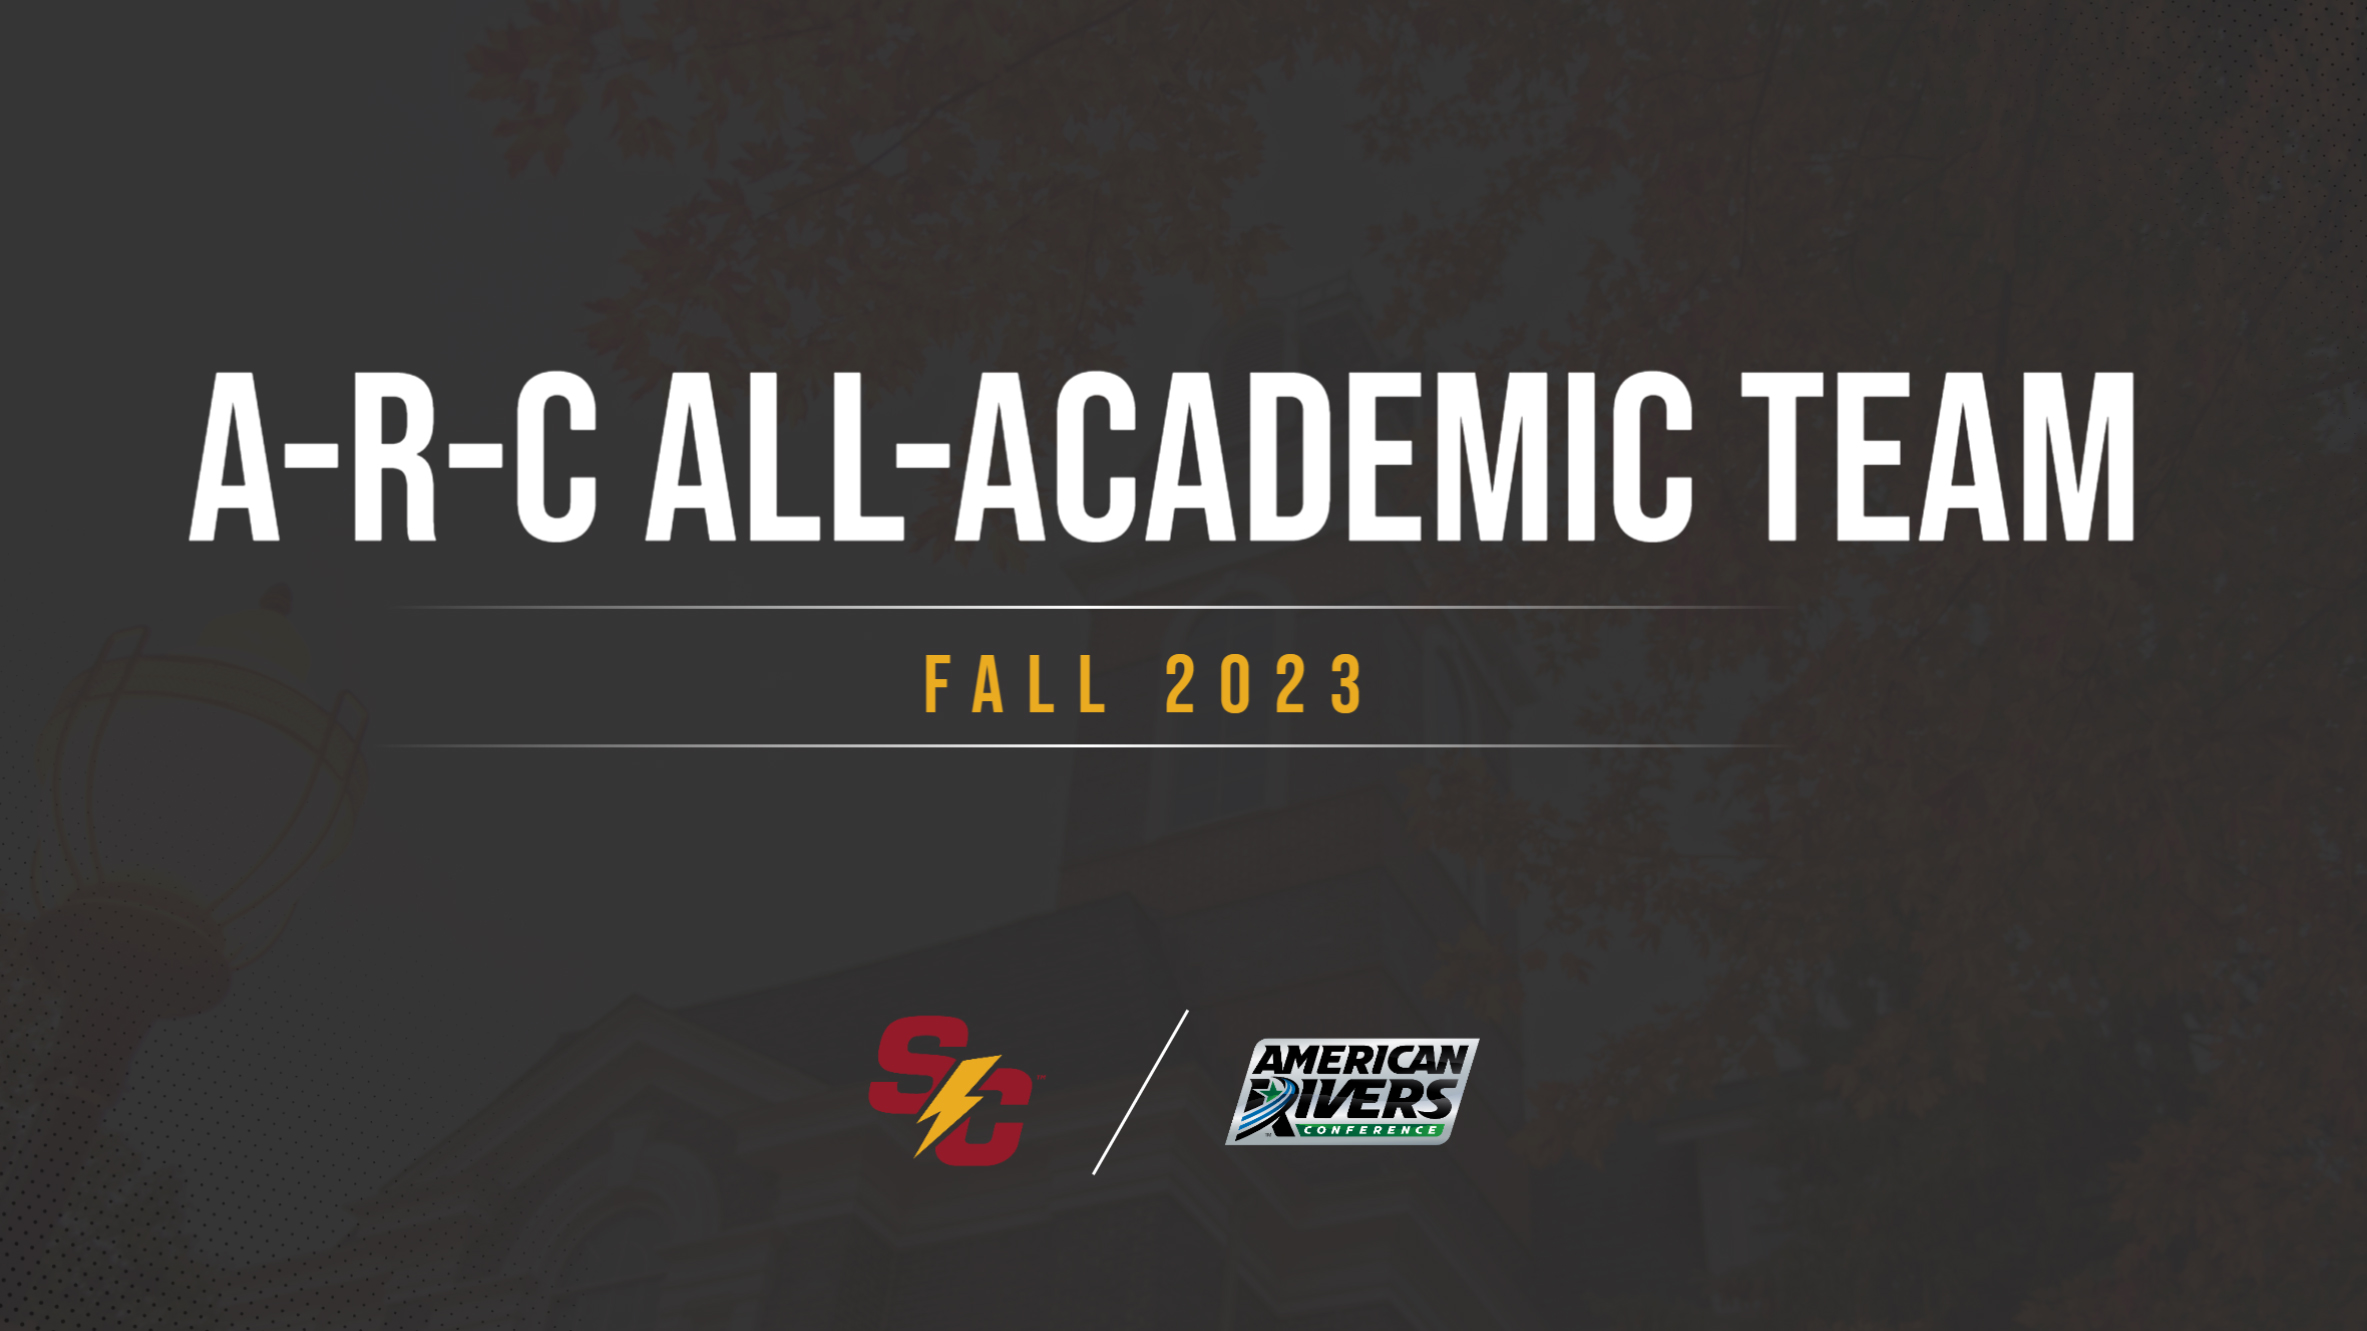 Seventy-five student-athletes named to A-R-C All-Academic Team